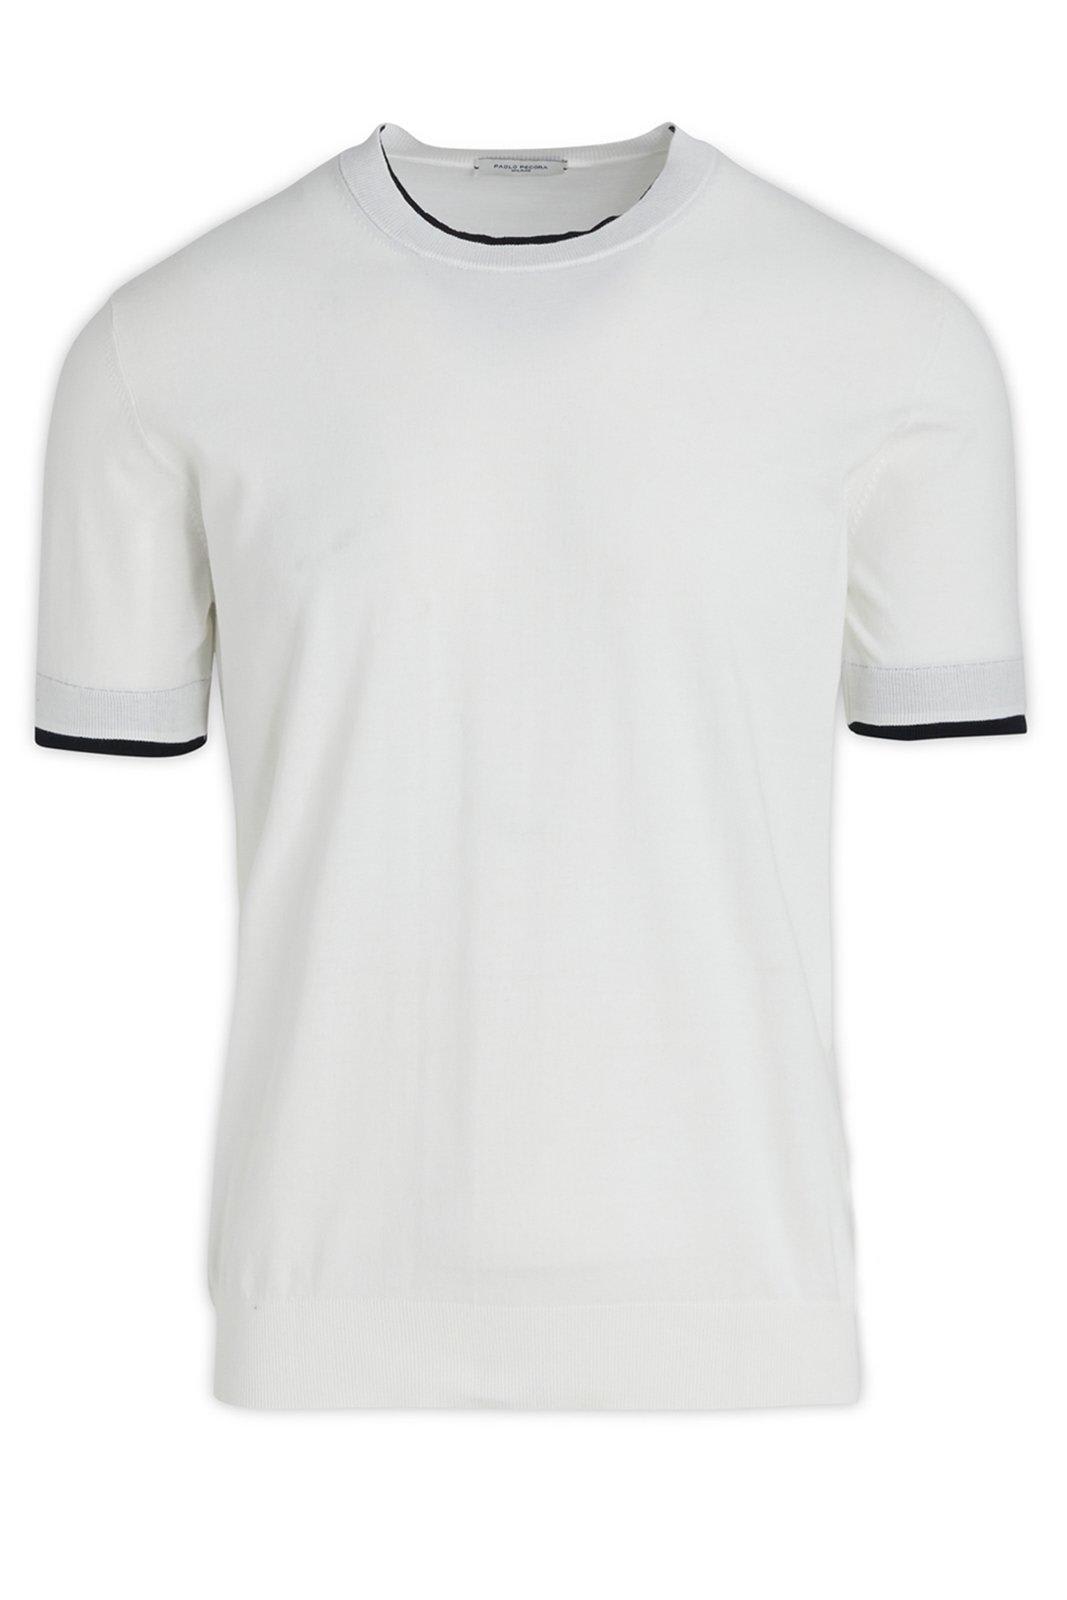 Paolo Pecora Short-sleeved Knitted T-shirt In Bianco